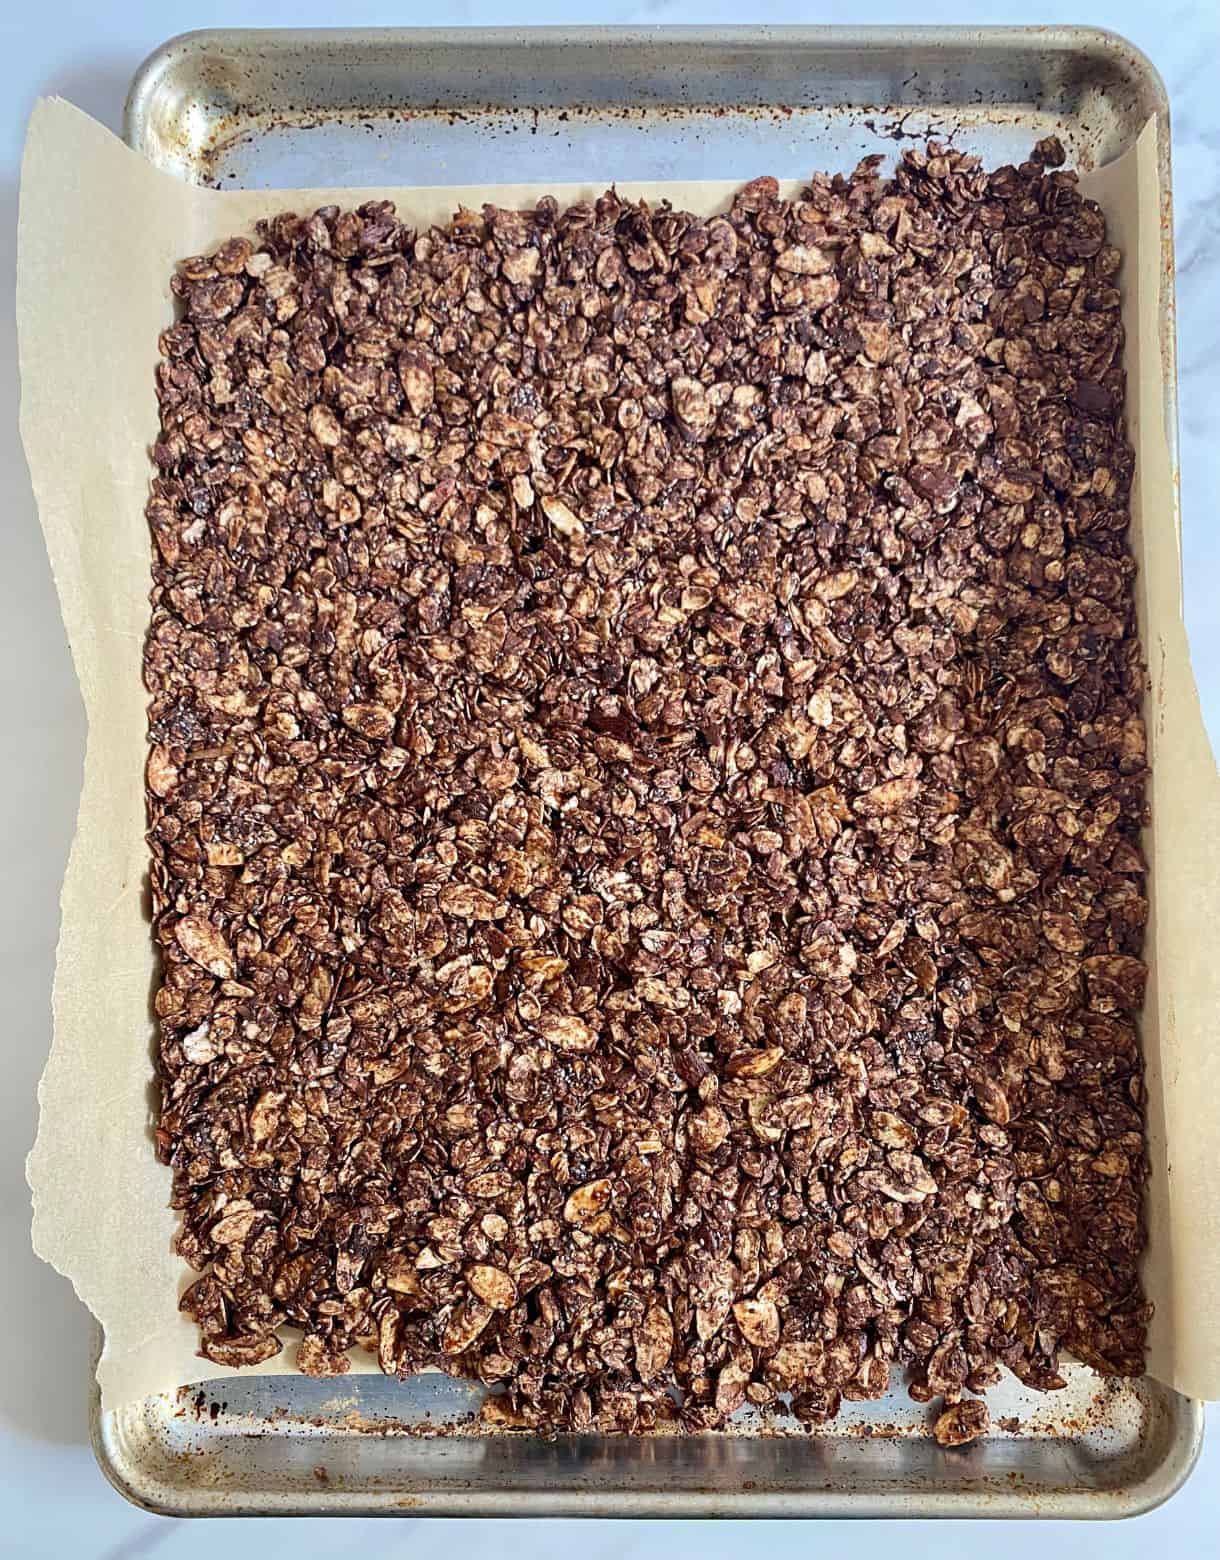 A sheet pan with Dark Chocolate Granola spread on it ready to go in the oven.